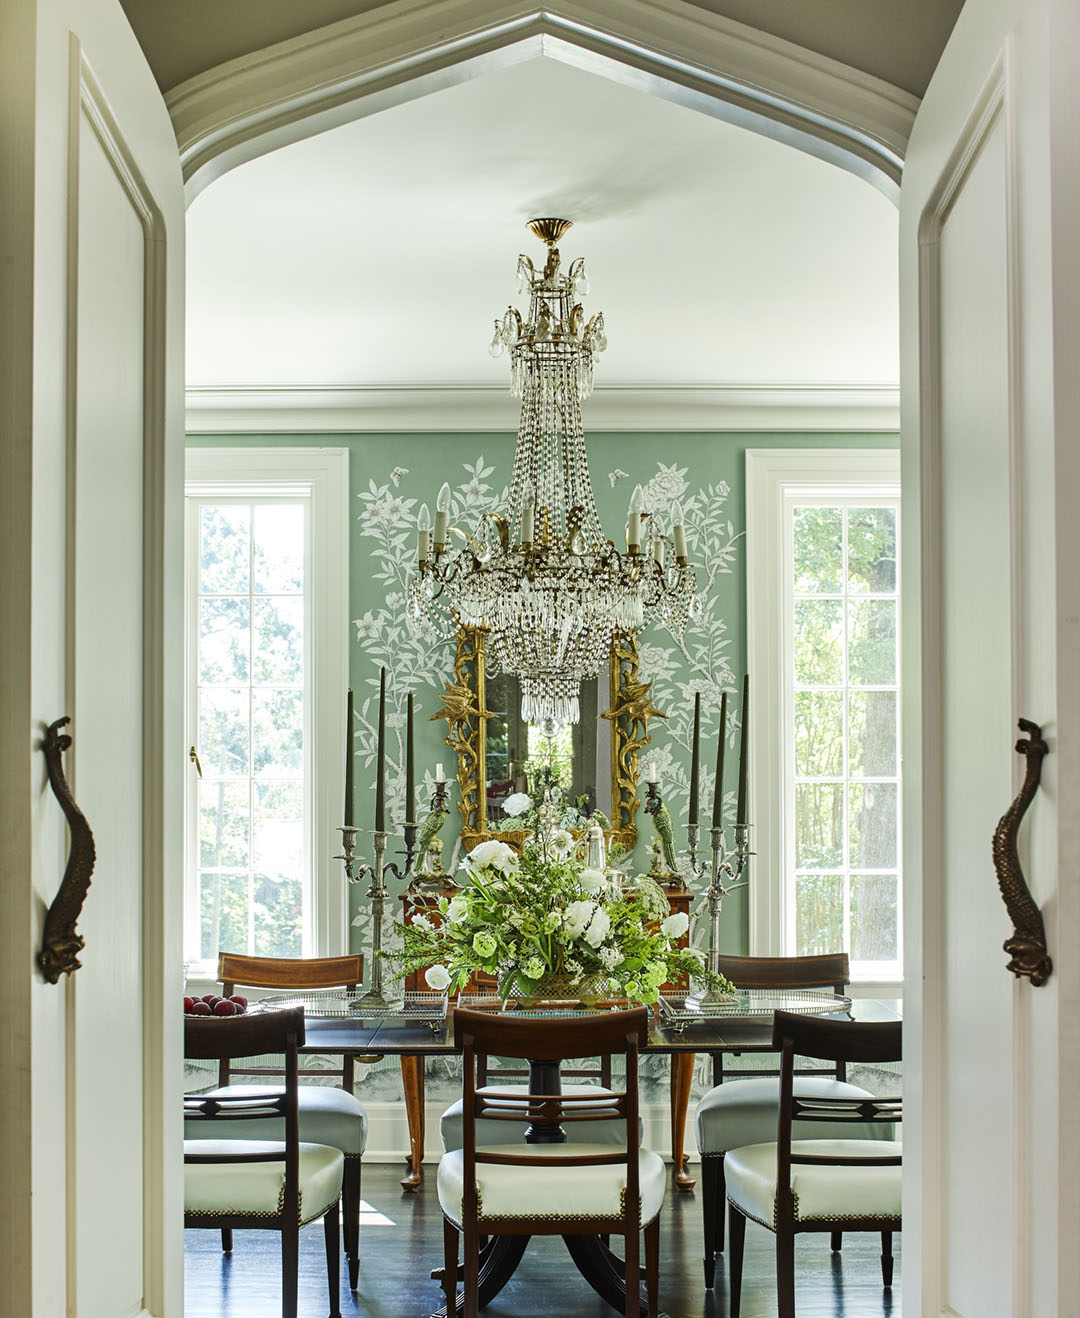 Double doors open to reveal a dining room papered in a custom, soft blue-green Gracie wallpaper, with an crystal chandelier and ornate gilt mirror